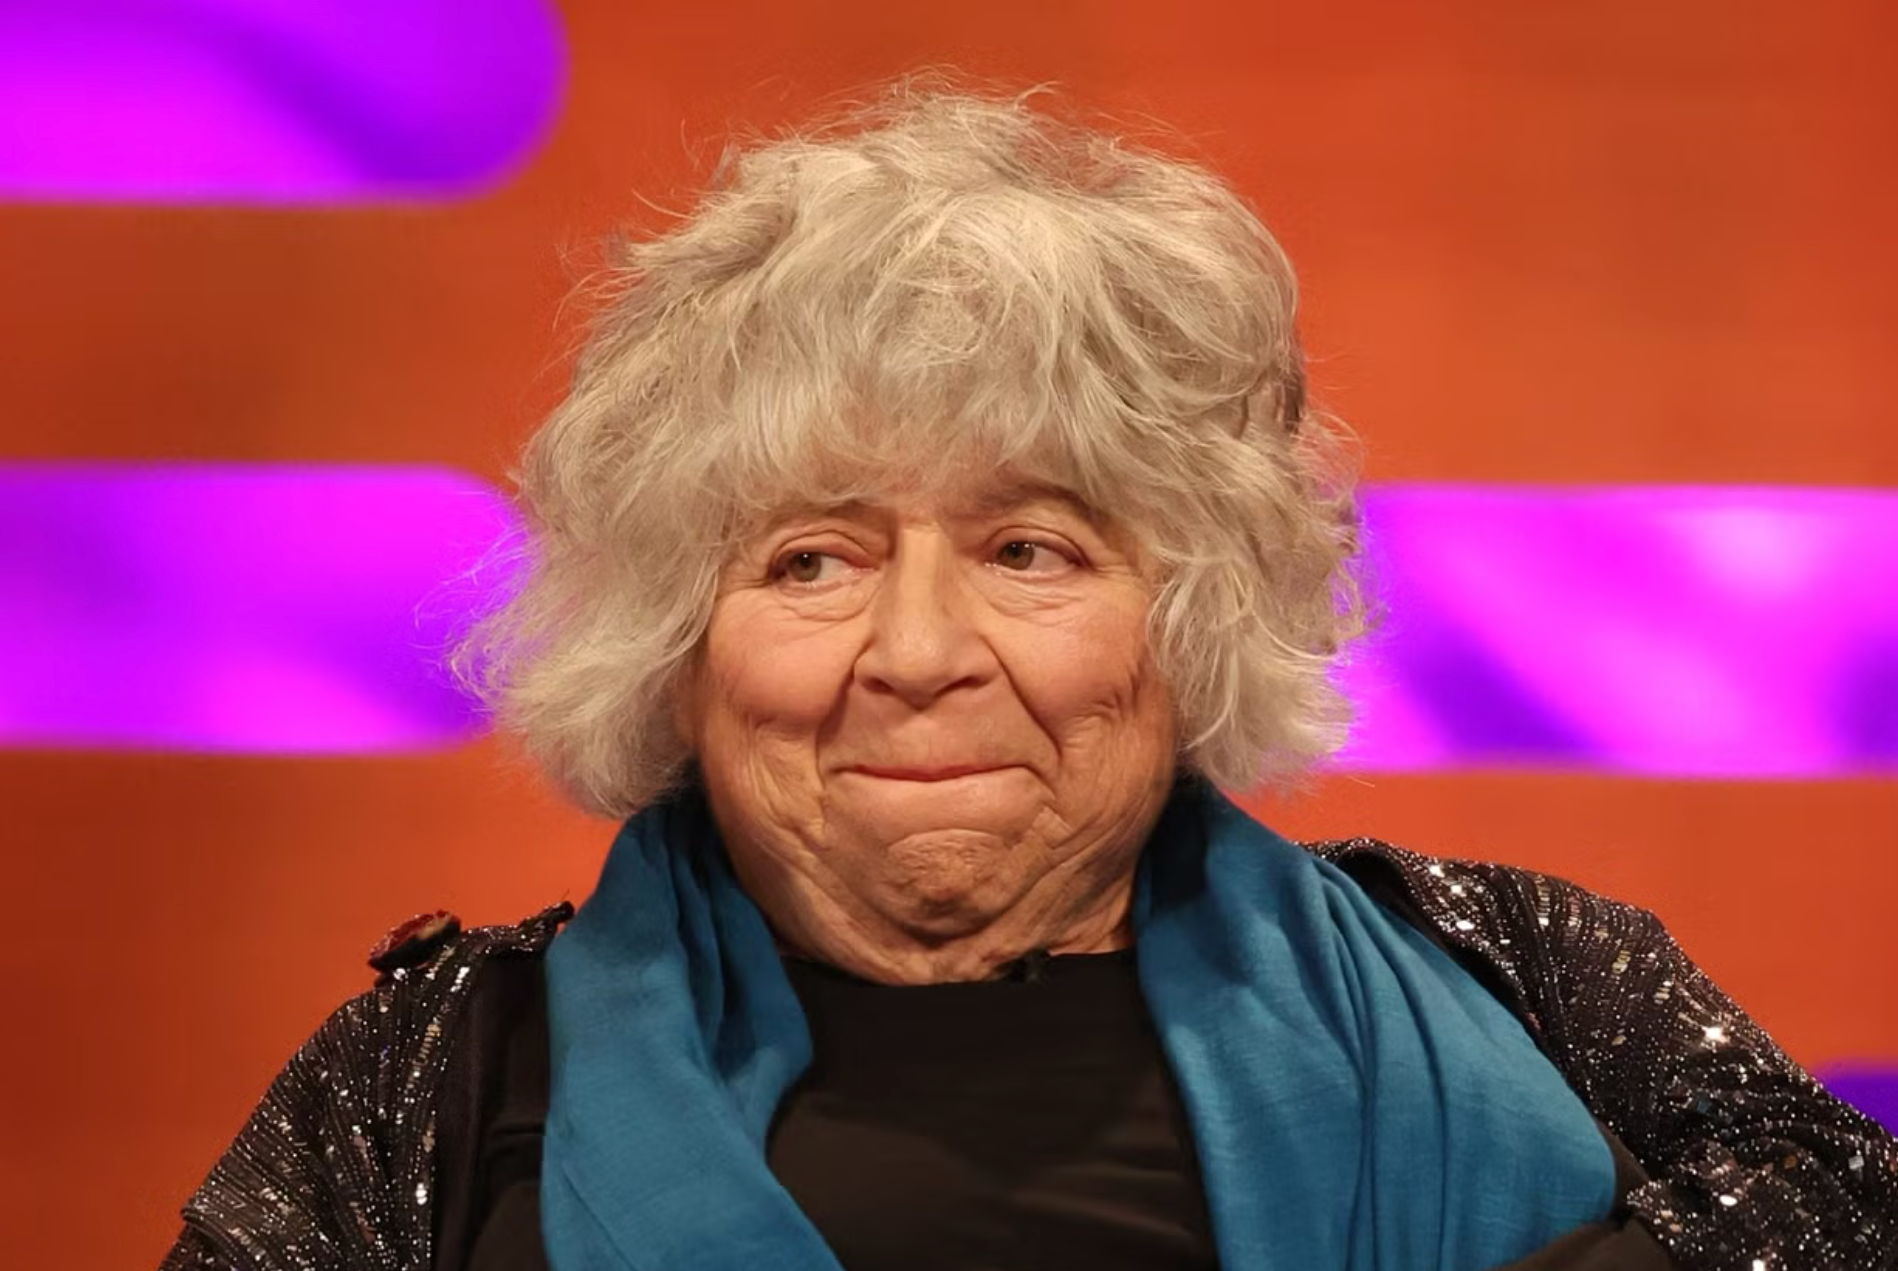 Miriam Margolyes caused nervous laughter in the ‘ Loose Women’ studio after she unexpectedly swore live on the ITV programme